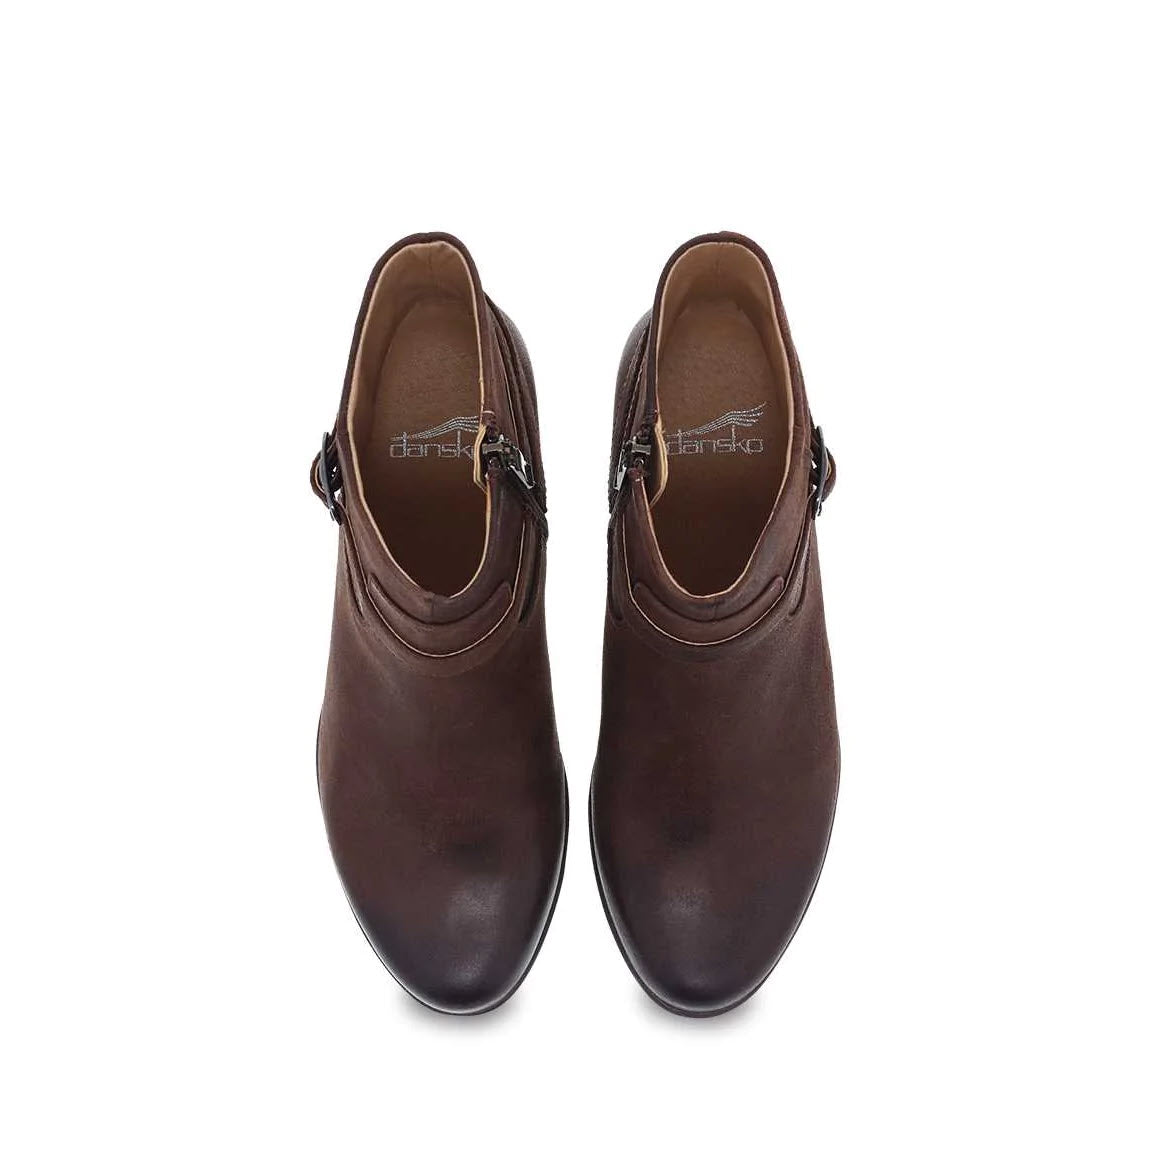 A pair of dark brown leather loafers with zippers and Dansko Natural Arch support, viewed from the top on a white background.